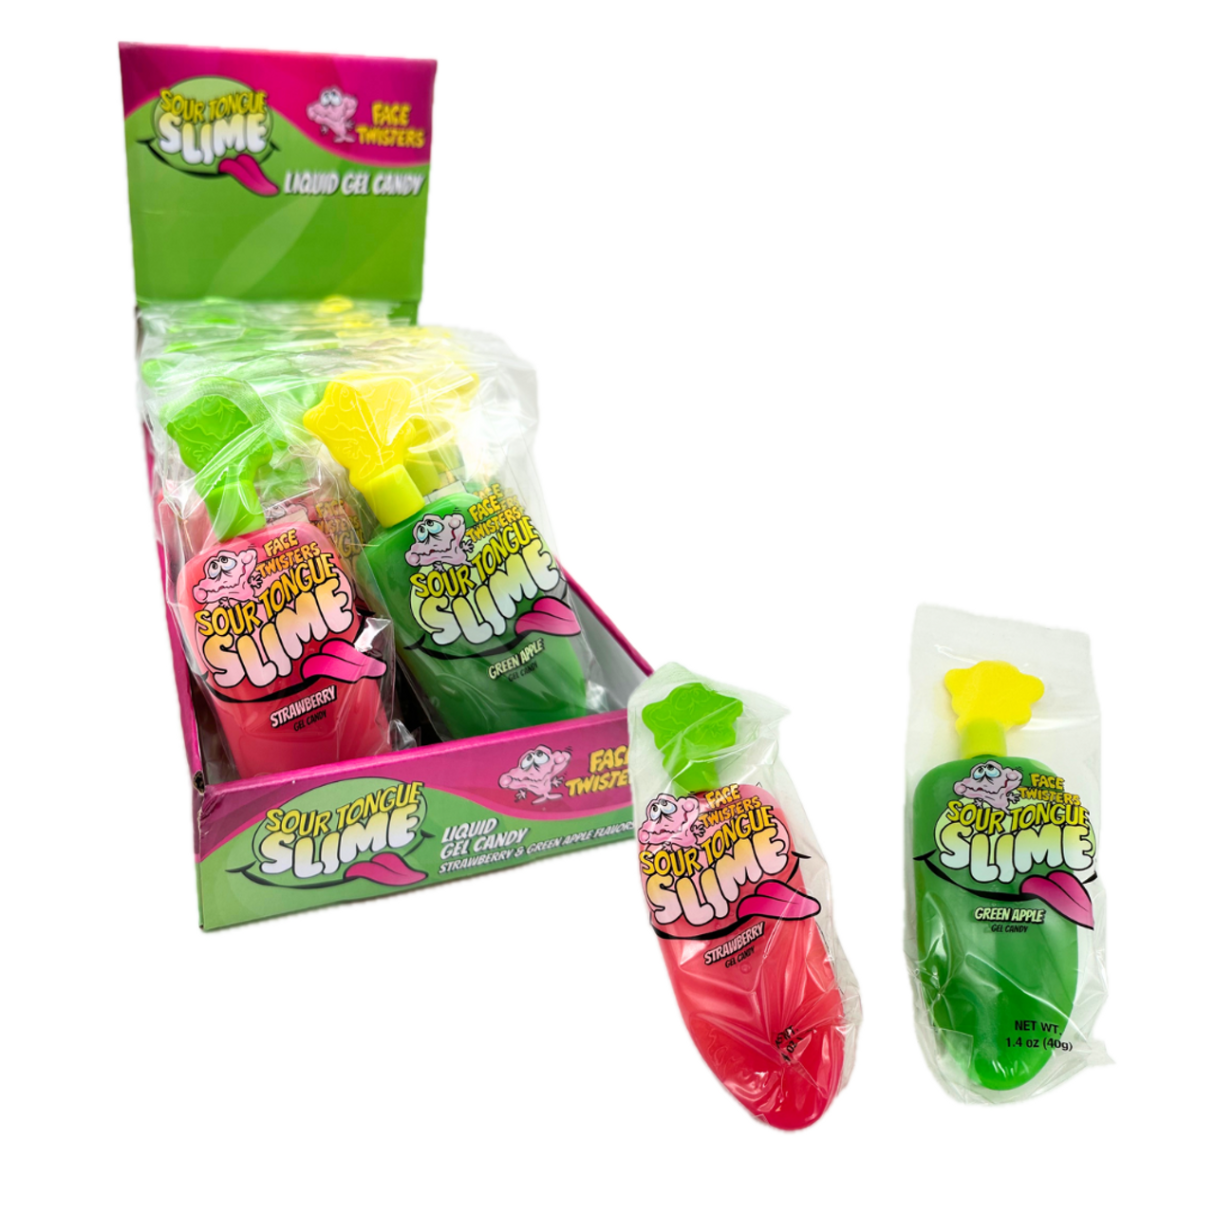 Sour Tongue Slime Liquid Gel Candy Strawberry & Green Apple - 1.4oz - 24ct